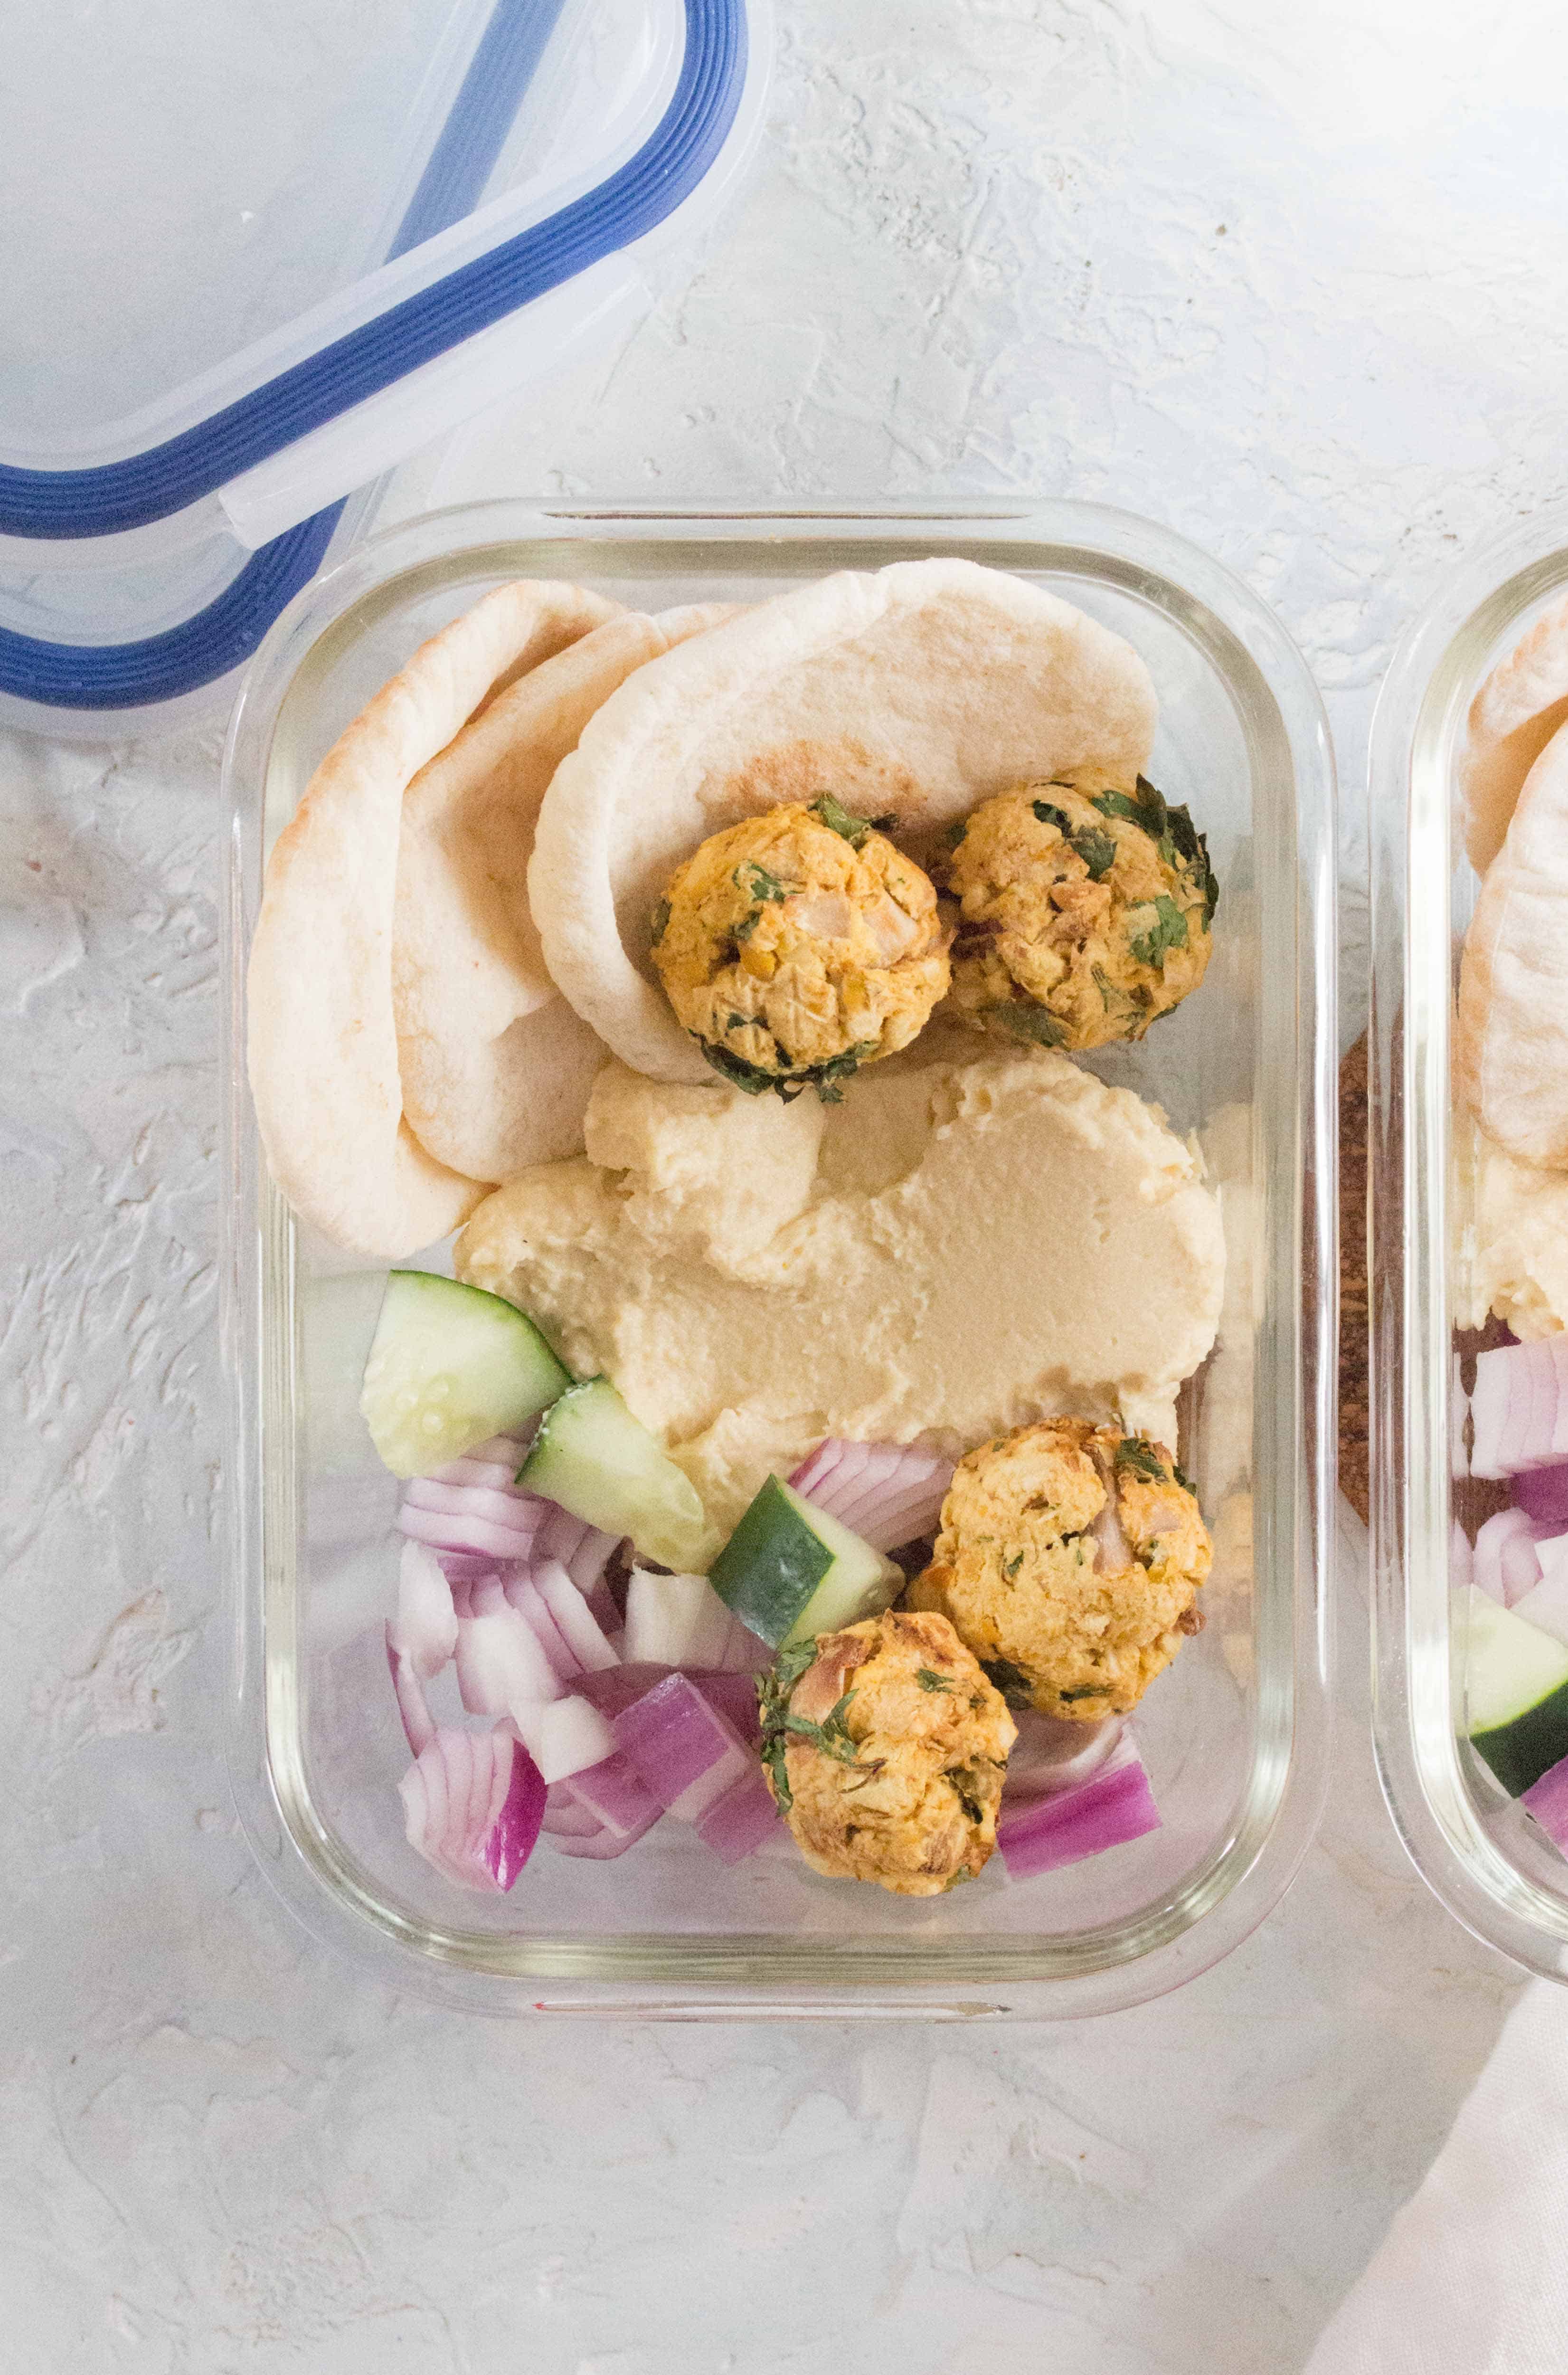 An easy and delicious meatless meal prep, you're going to want to make this Hummus and Falafel Meal Prep regularly!